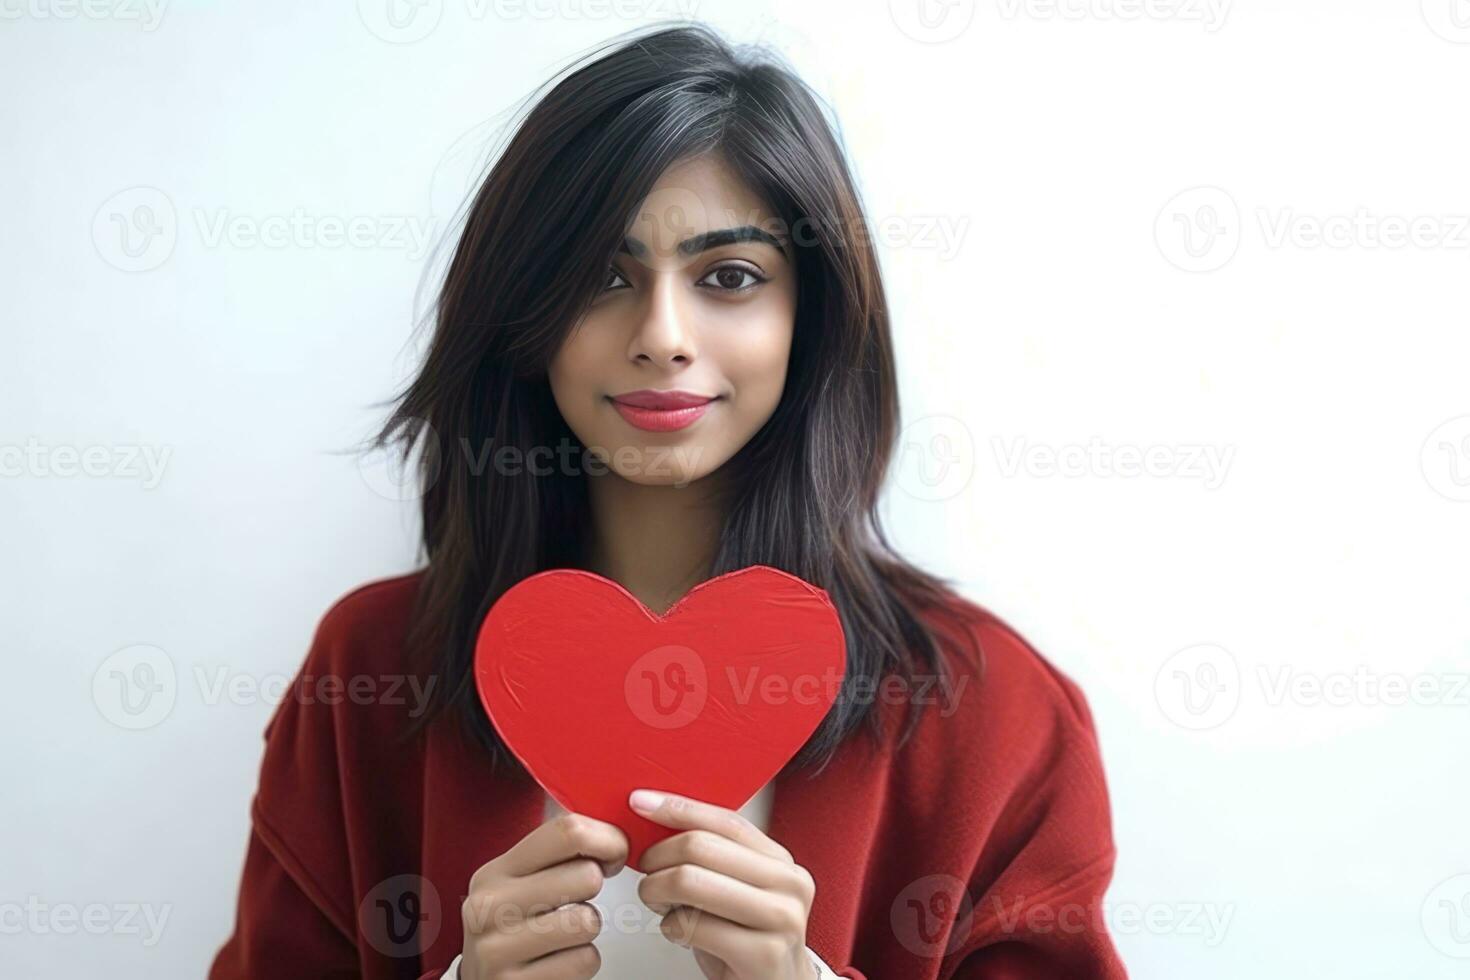 AI generated a young, attractive woman with dark hair holding a red heart-shaped sign. She appears to be posing for the photo, possibly conveying a message or emotion connected to the heart symbol. photo